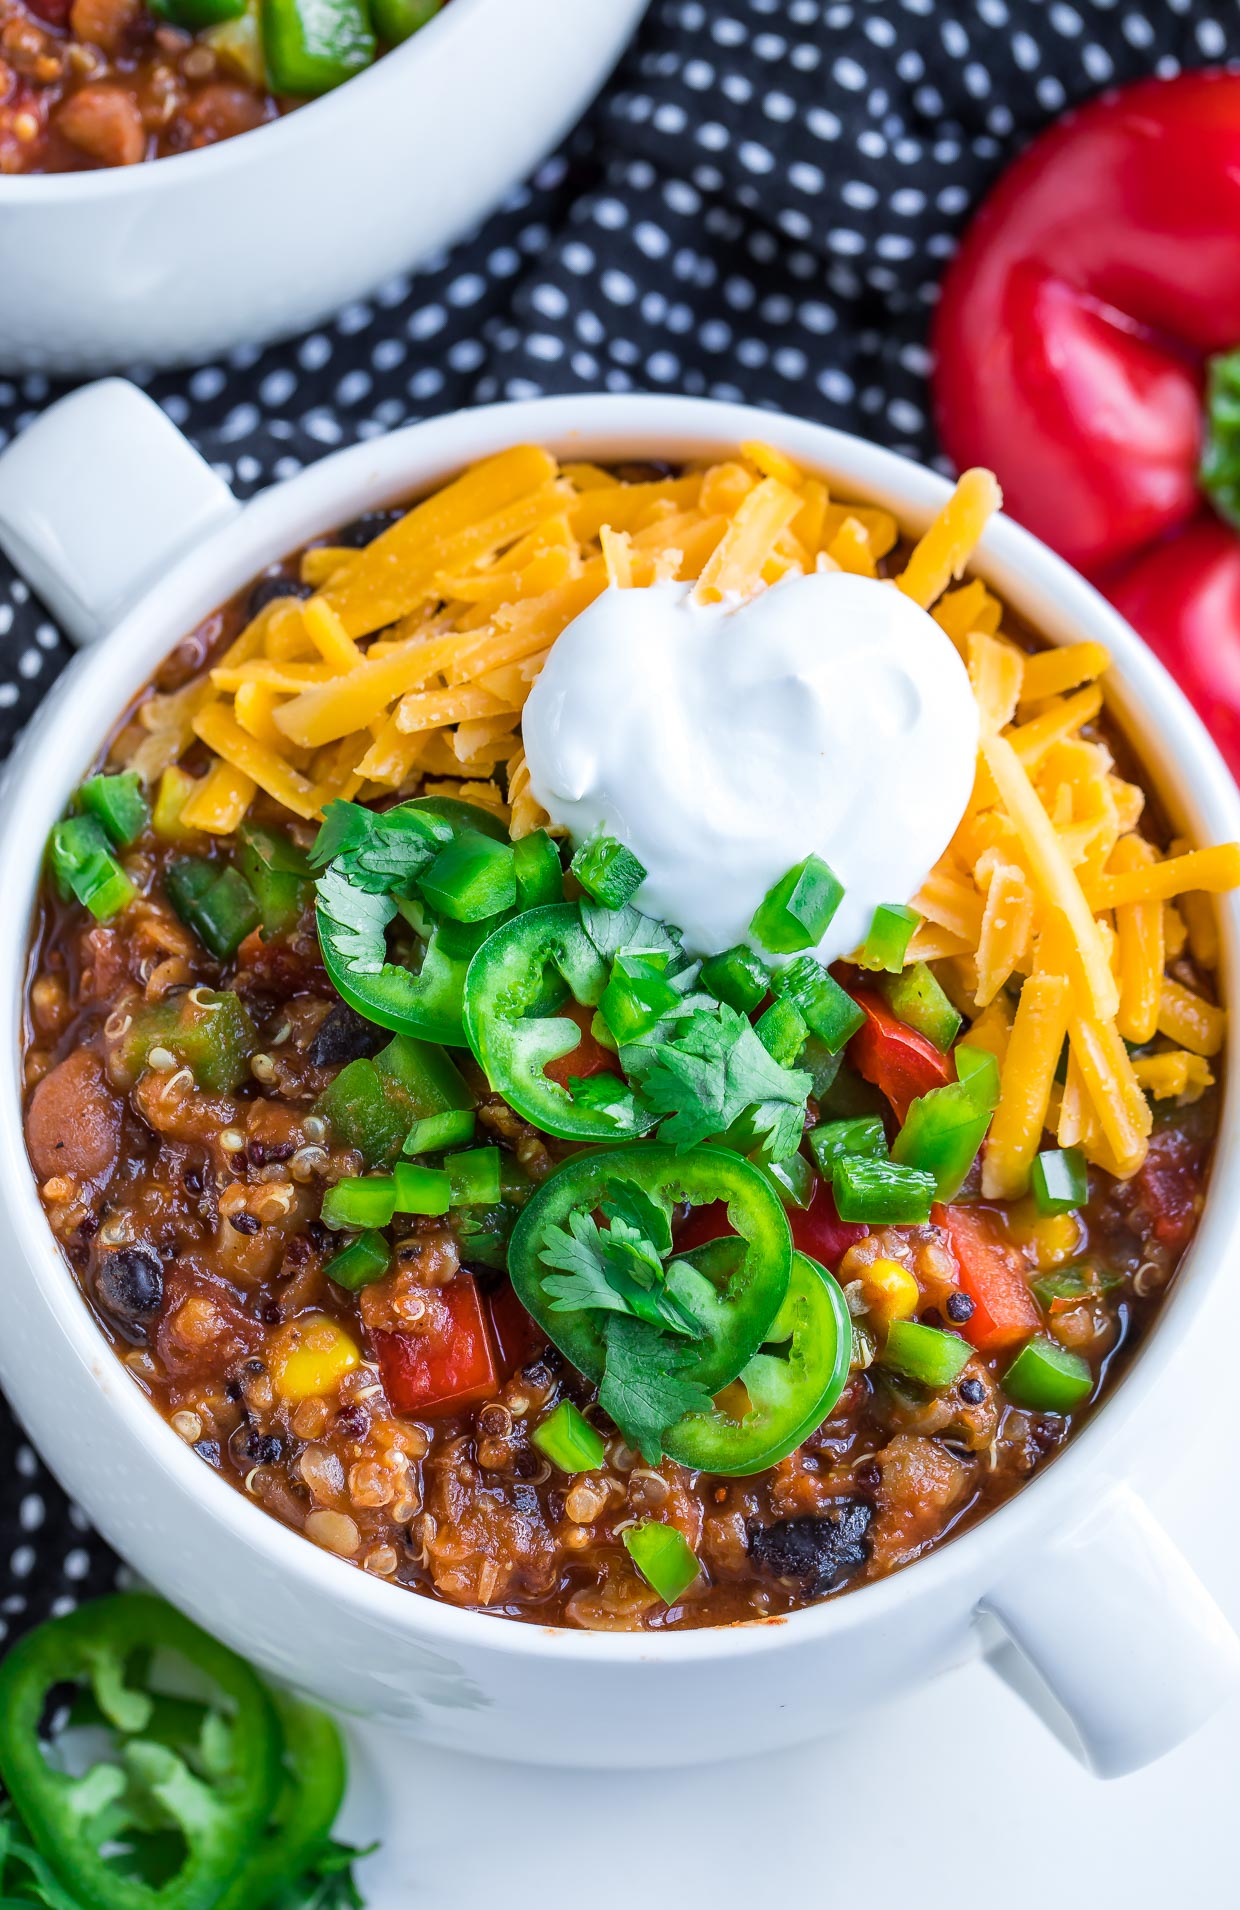 https://www.thewholesmiths.com/instant-pot-chili/